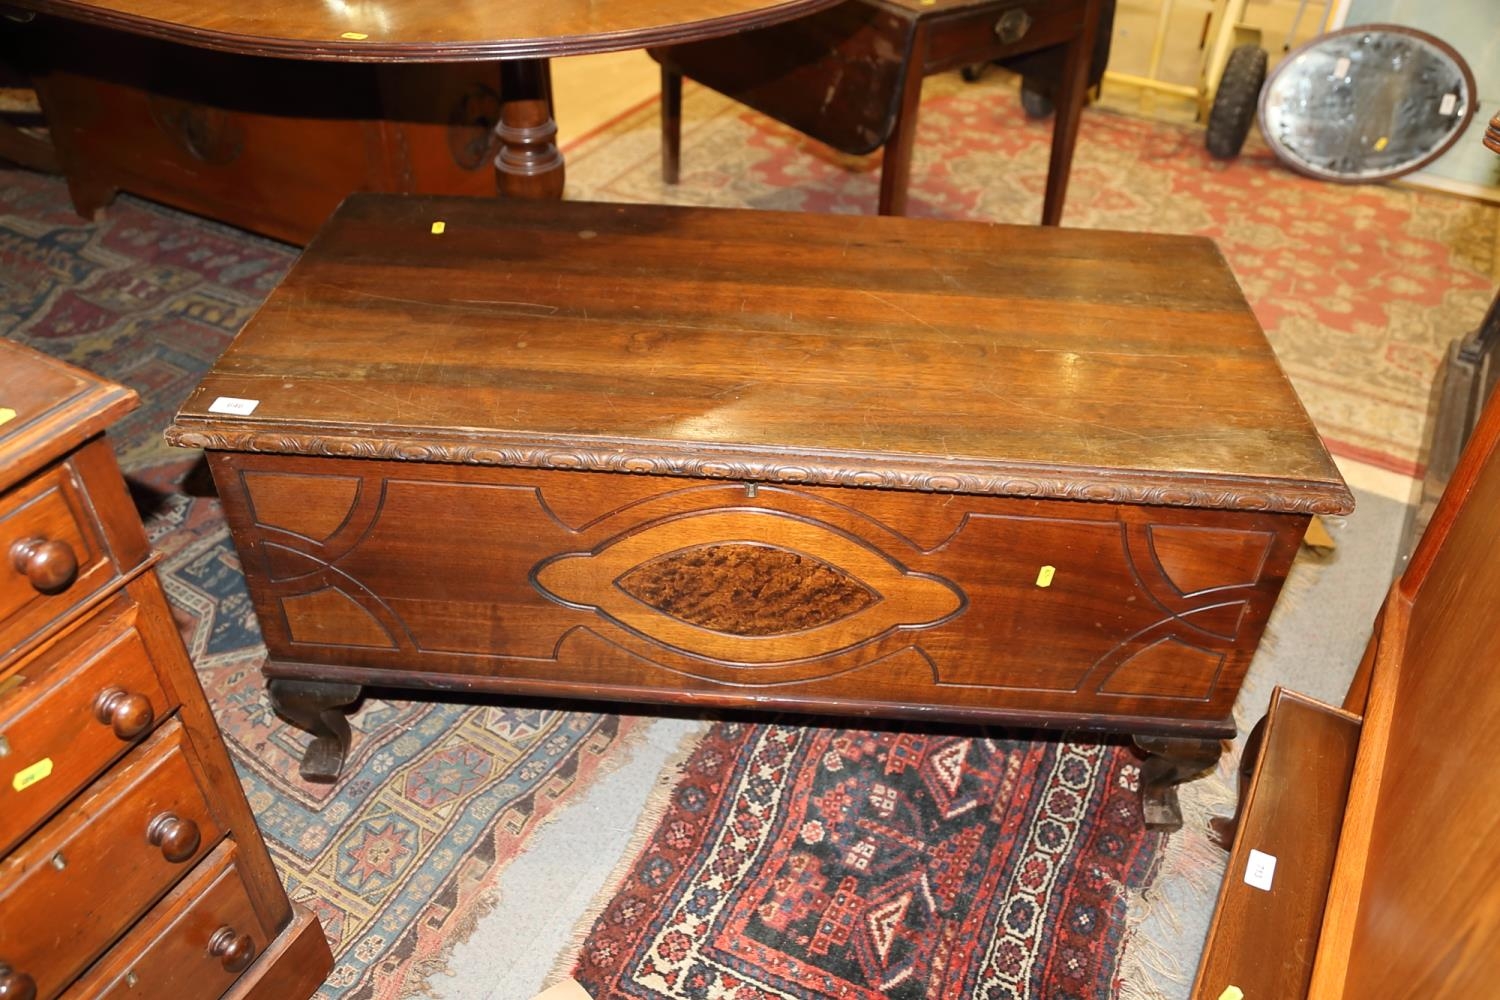 A 1930s oak and mahogany carved blanket box with cedarwood lining, 40" wide x 19" deep x 20" high